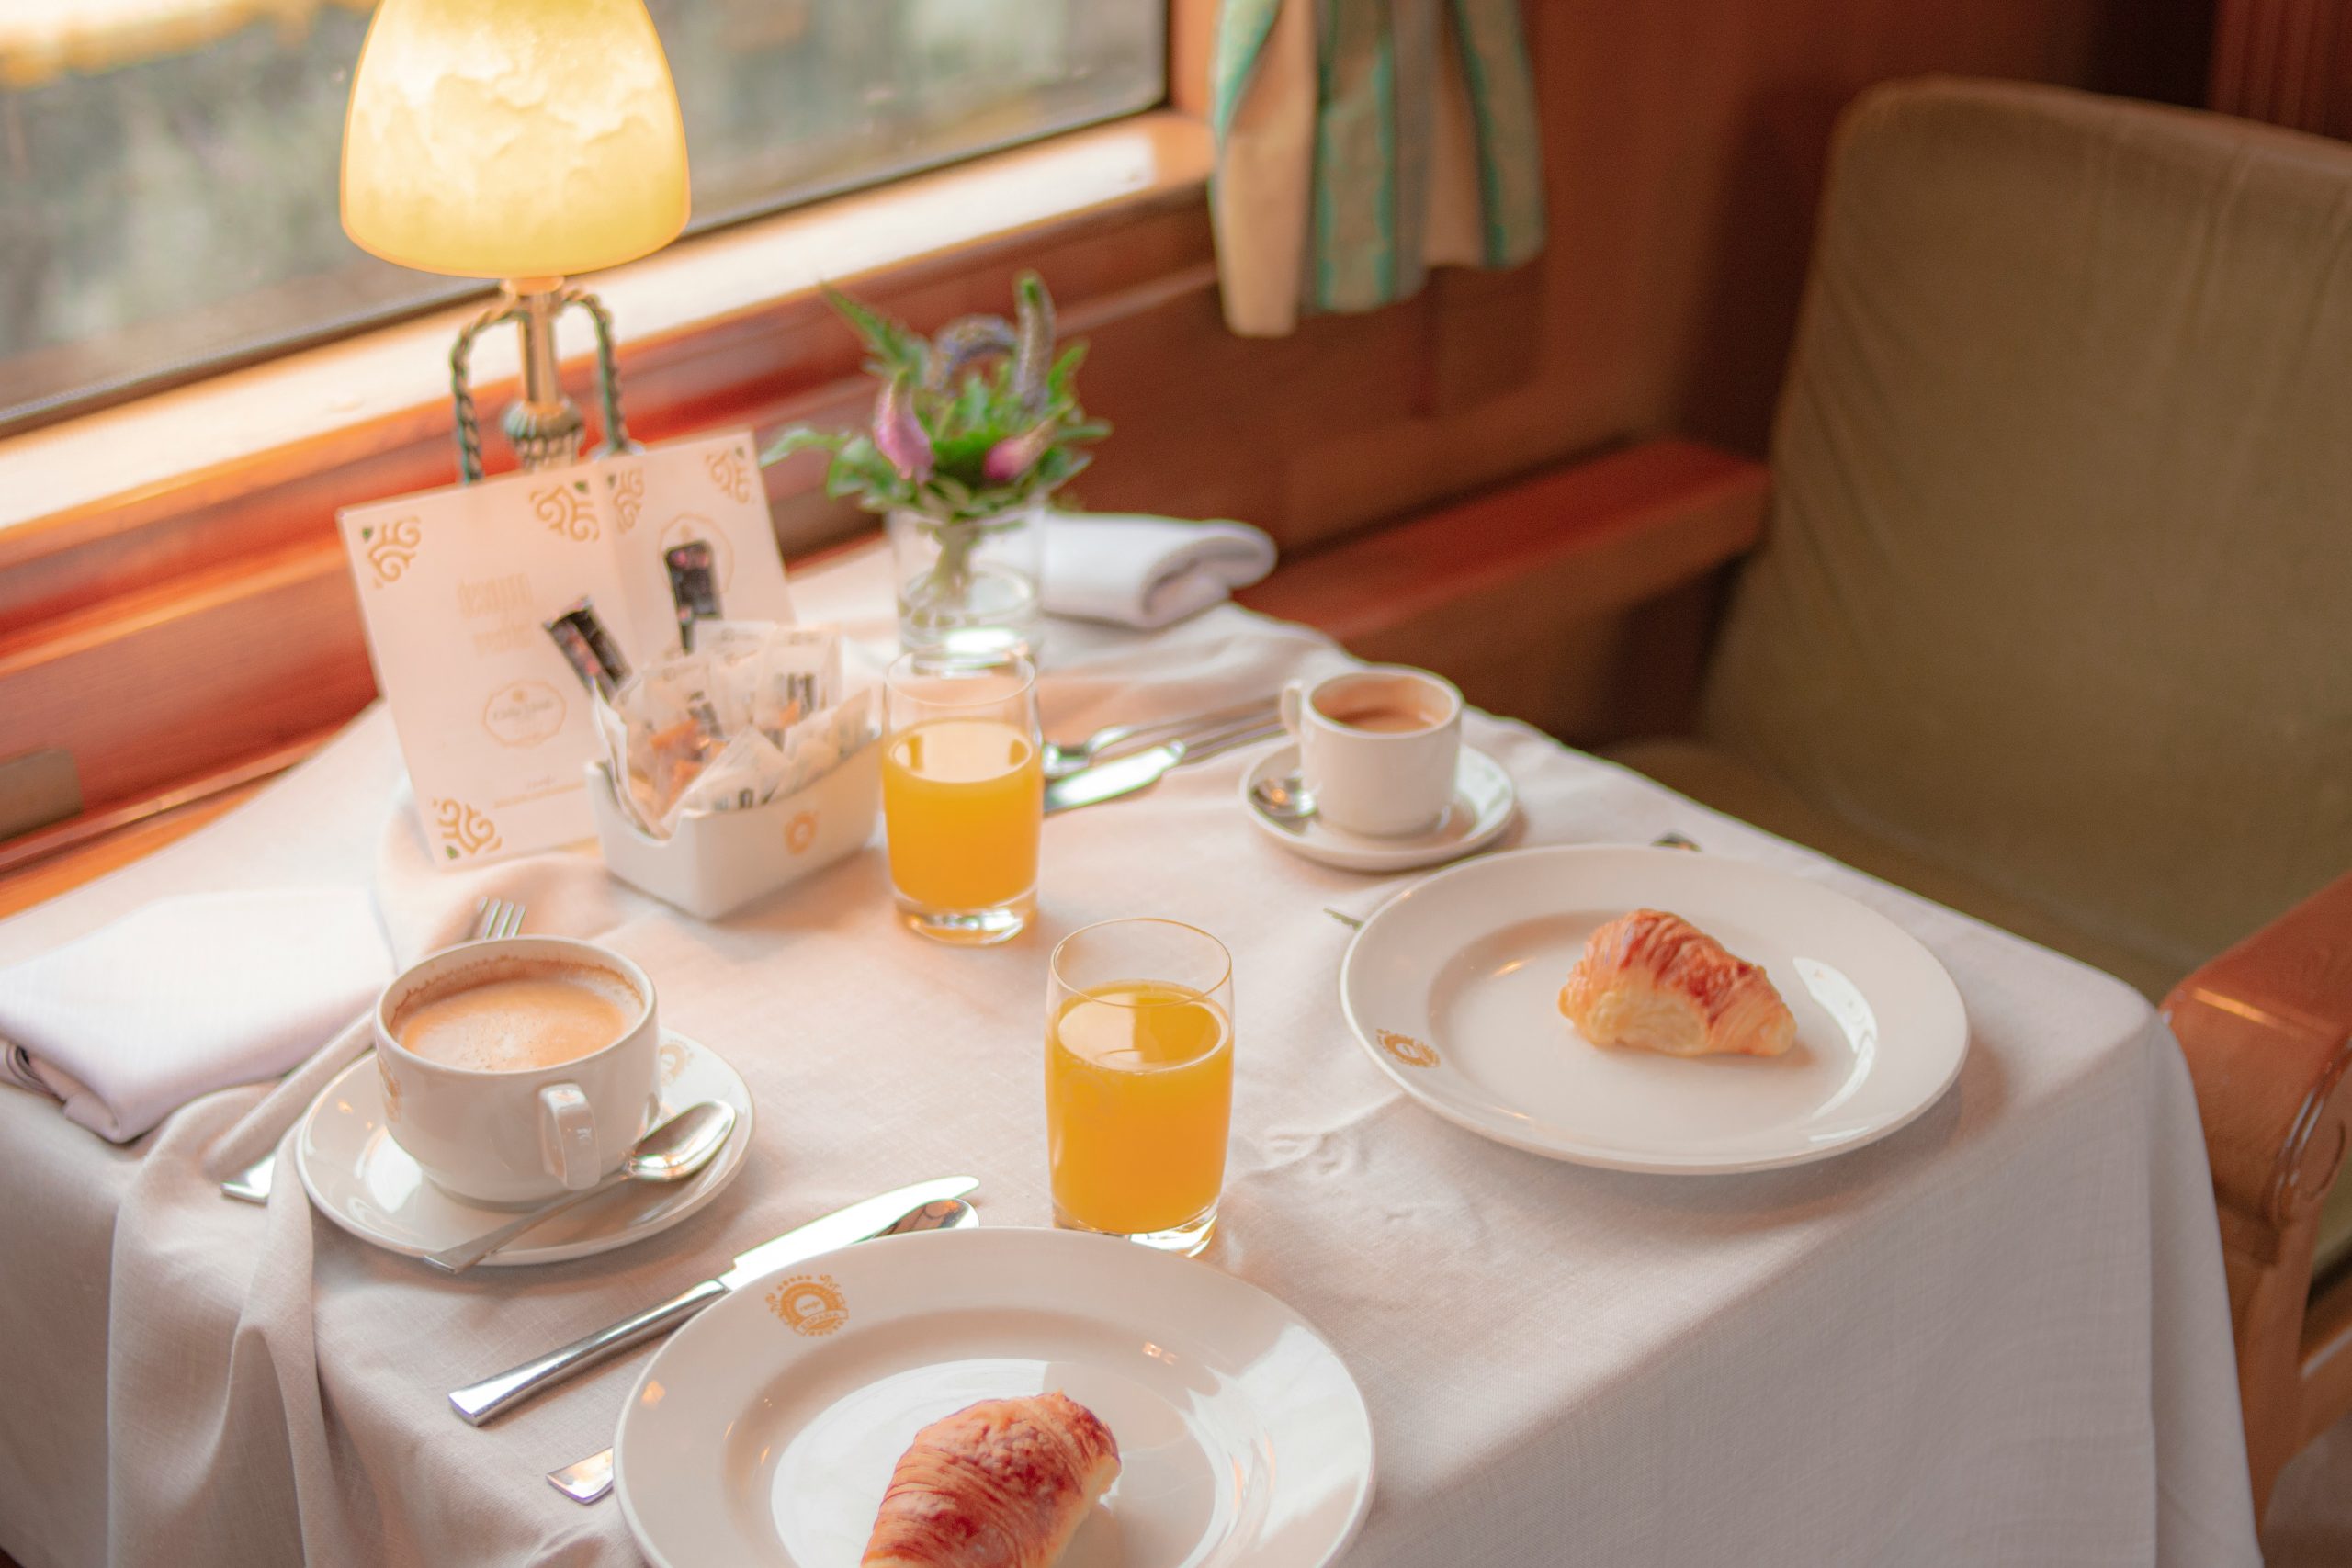 discover the epitome of luxury travel with our exclusive collection of luxury trains. experience exquisite service and breathtaking views aboard our opulent train journeys.